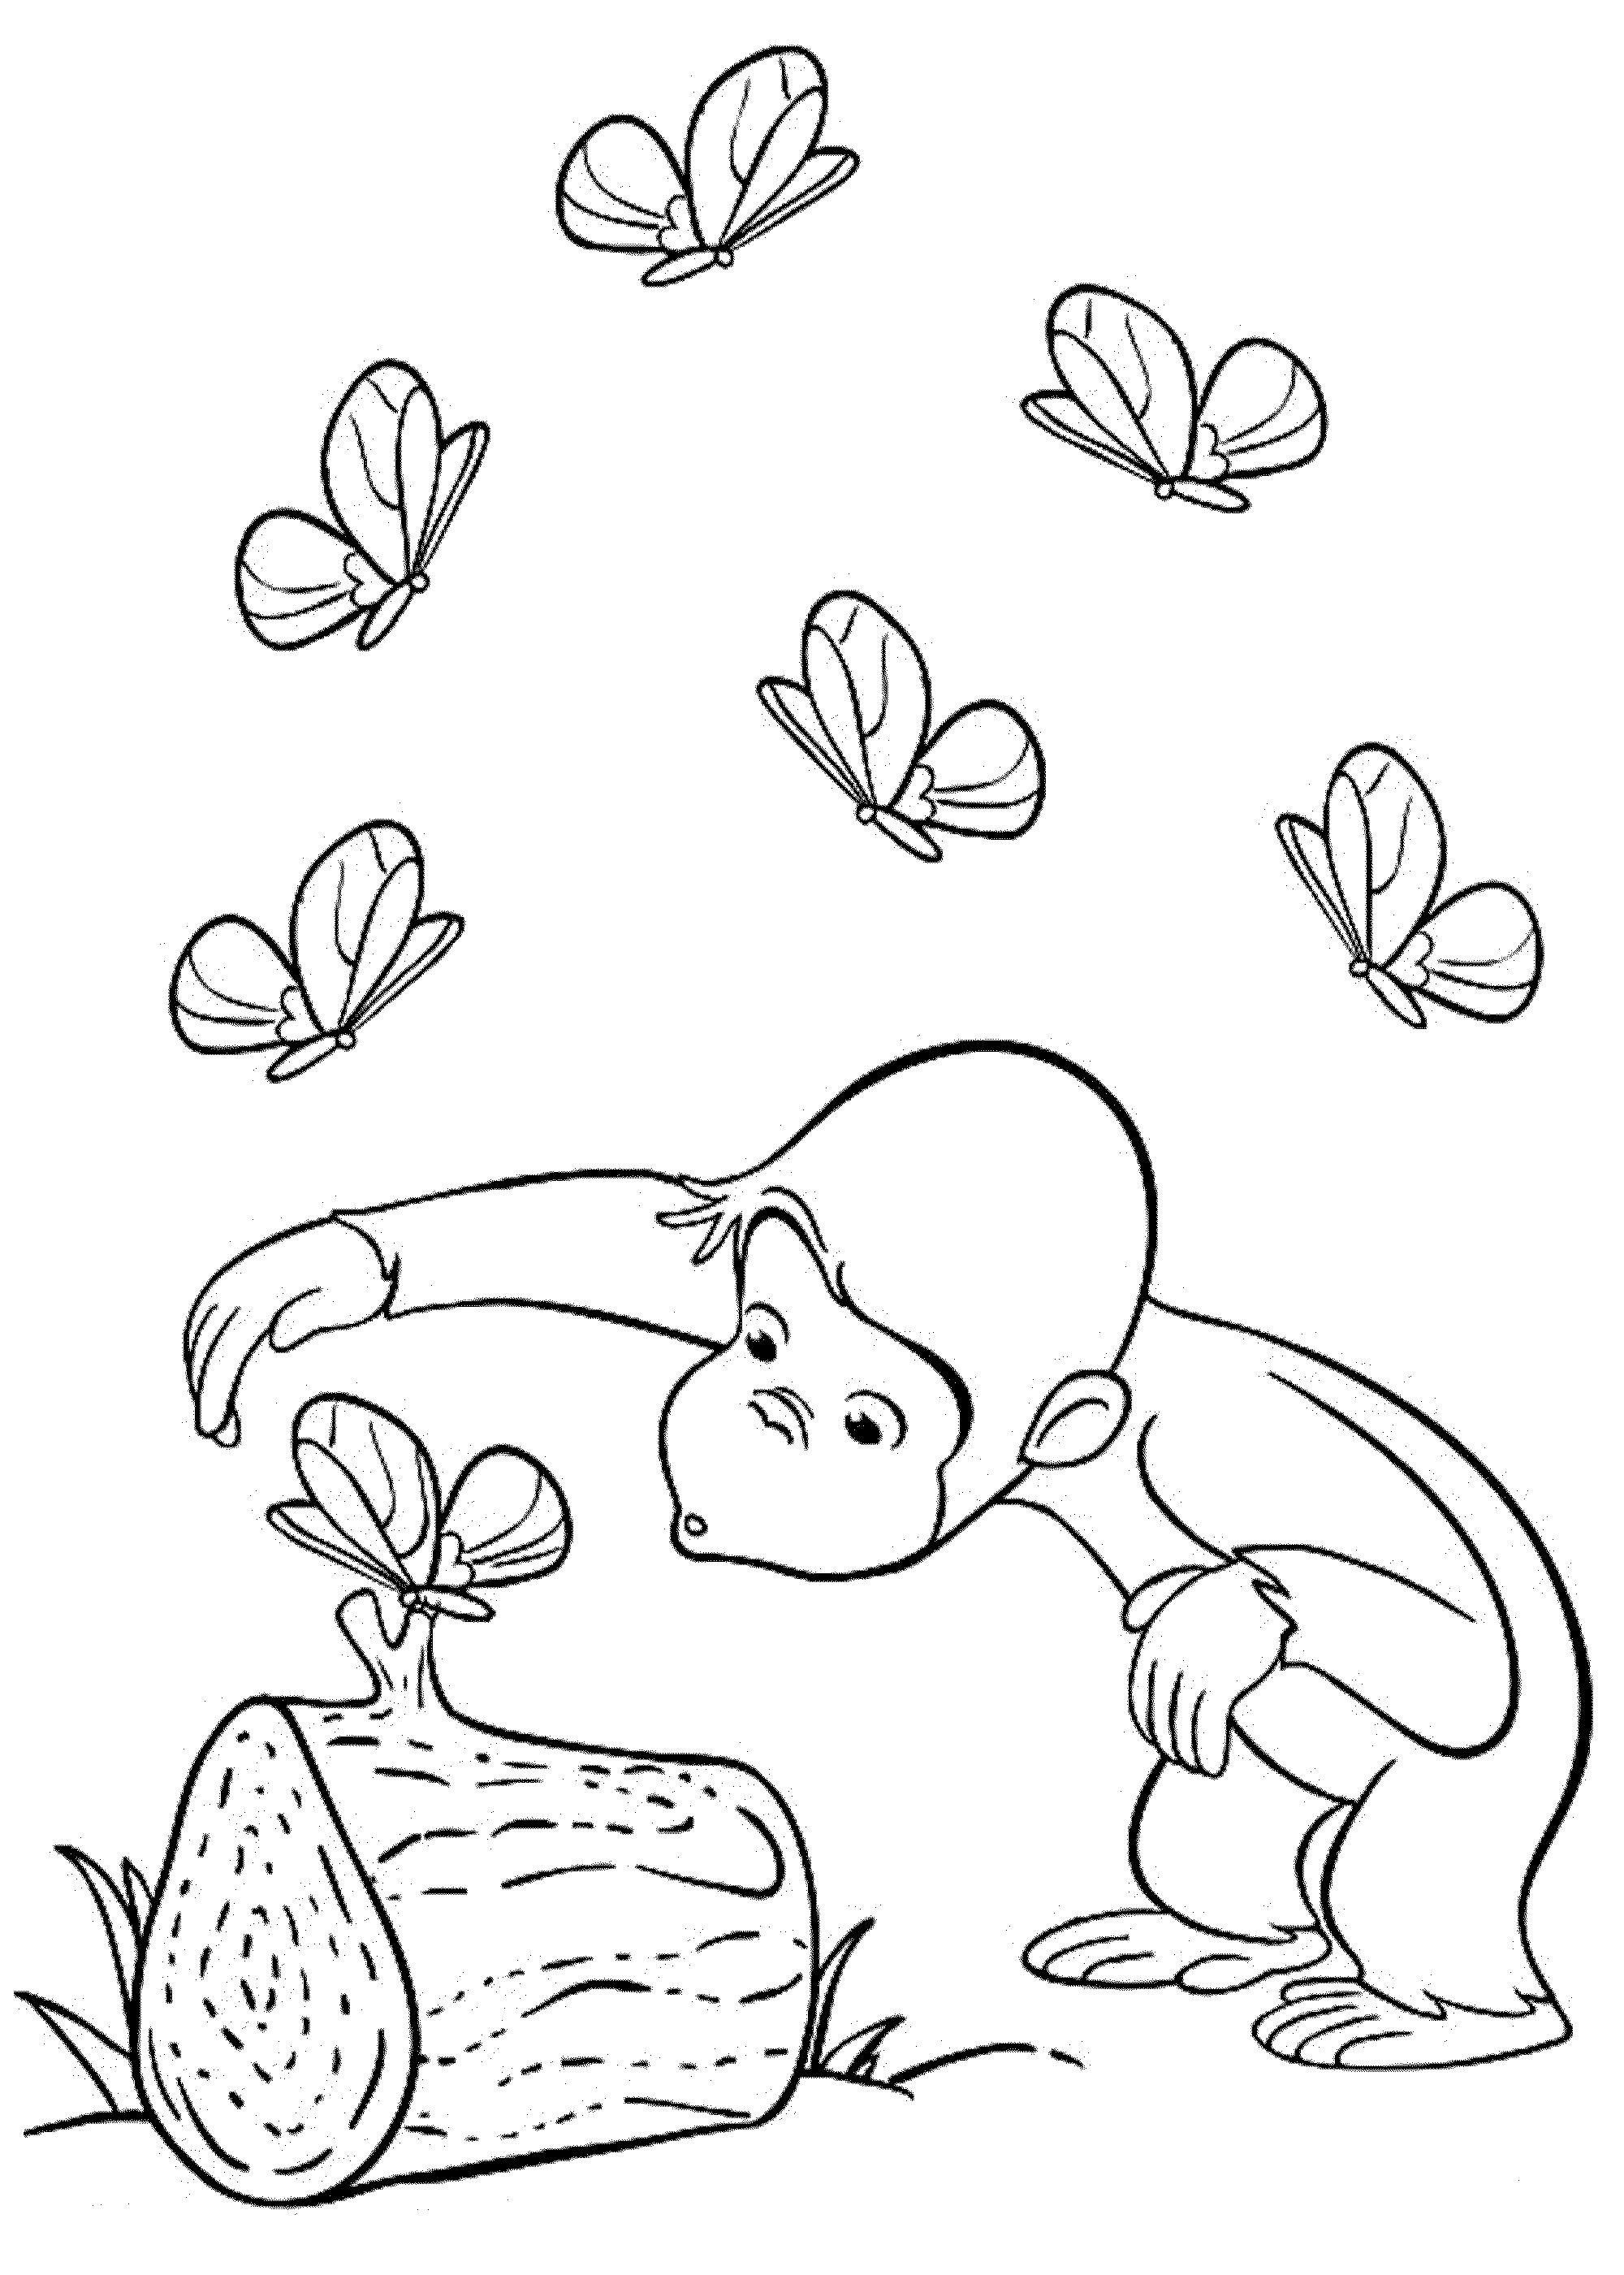 Printable Curious George Pictures - Printable Word Searches